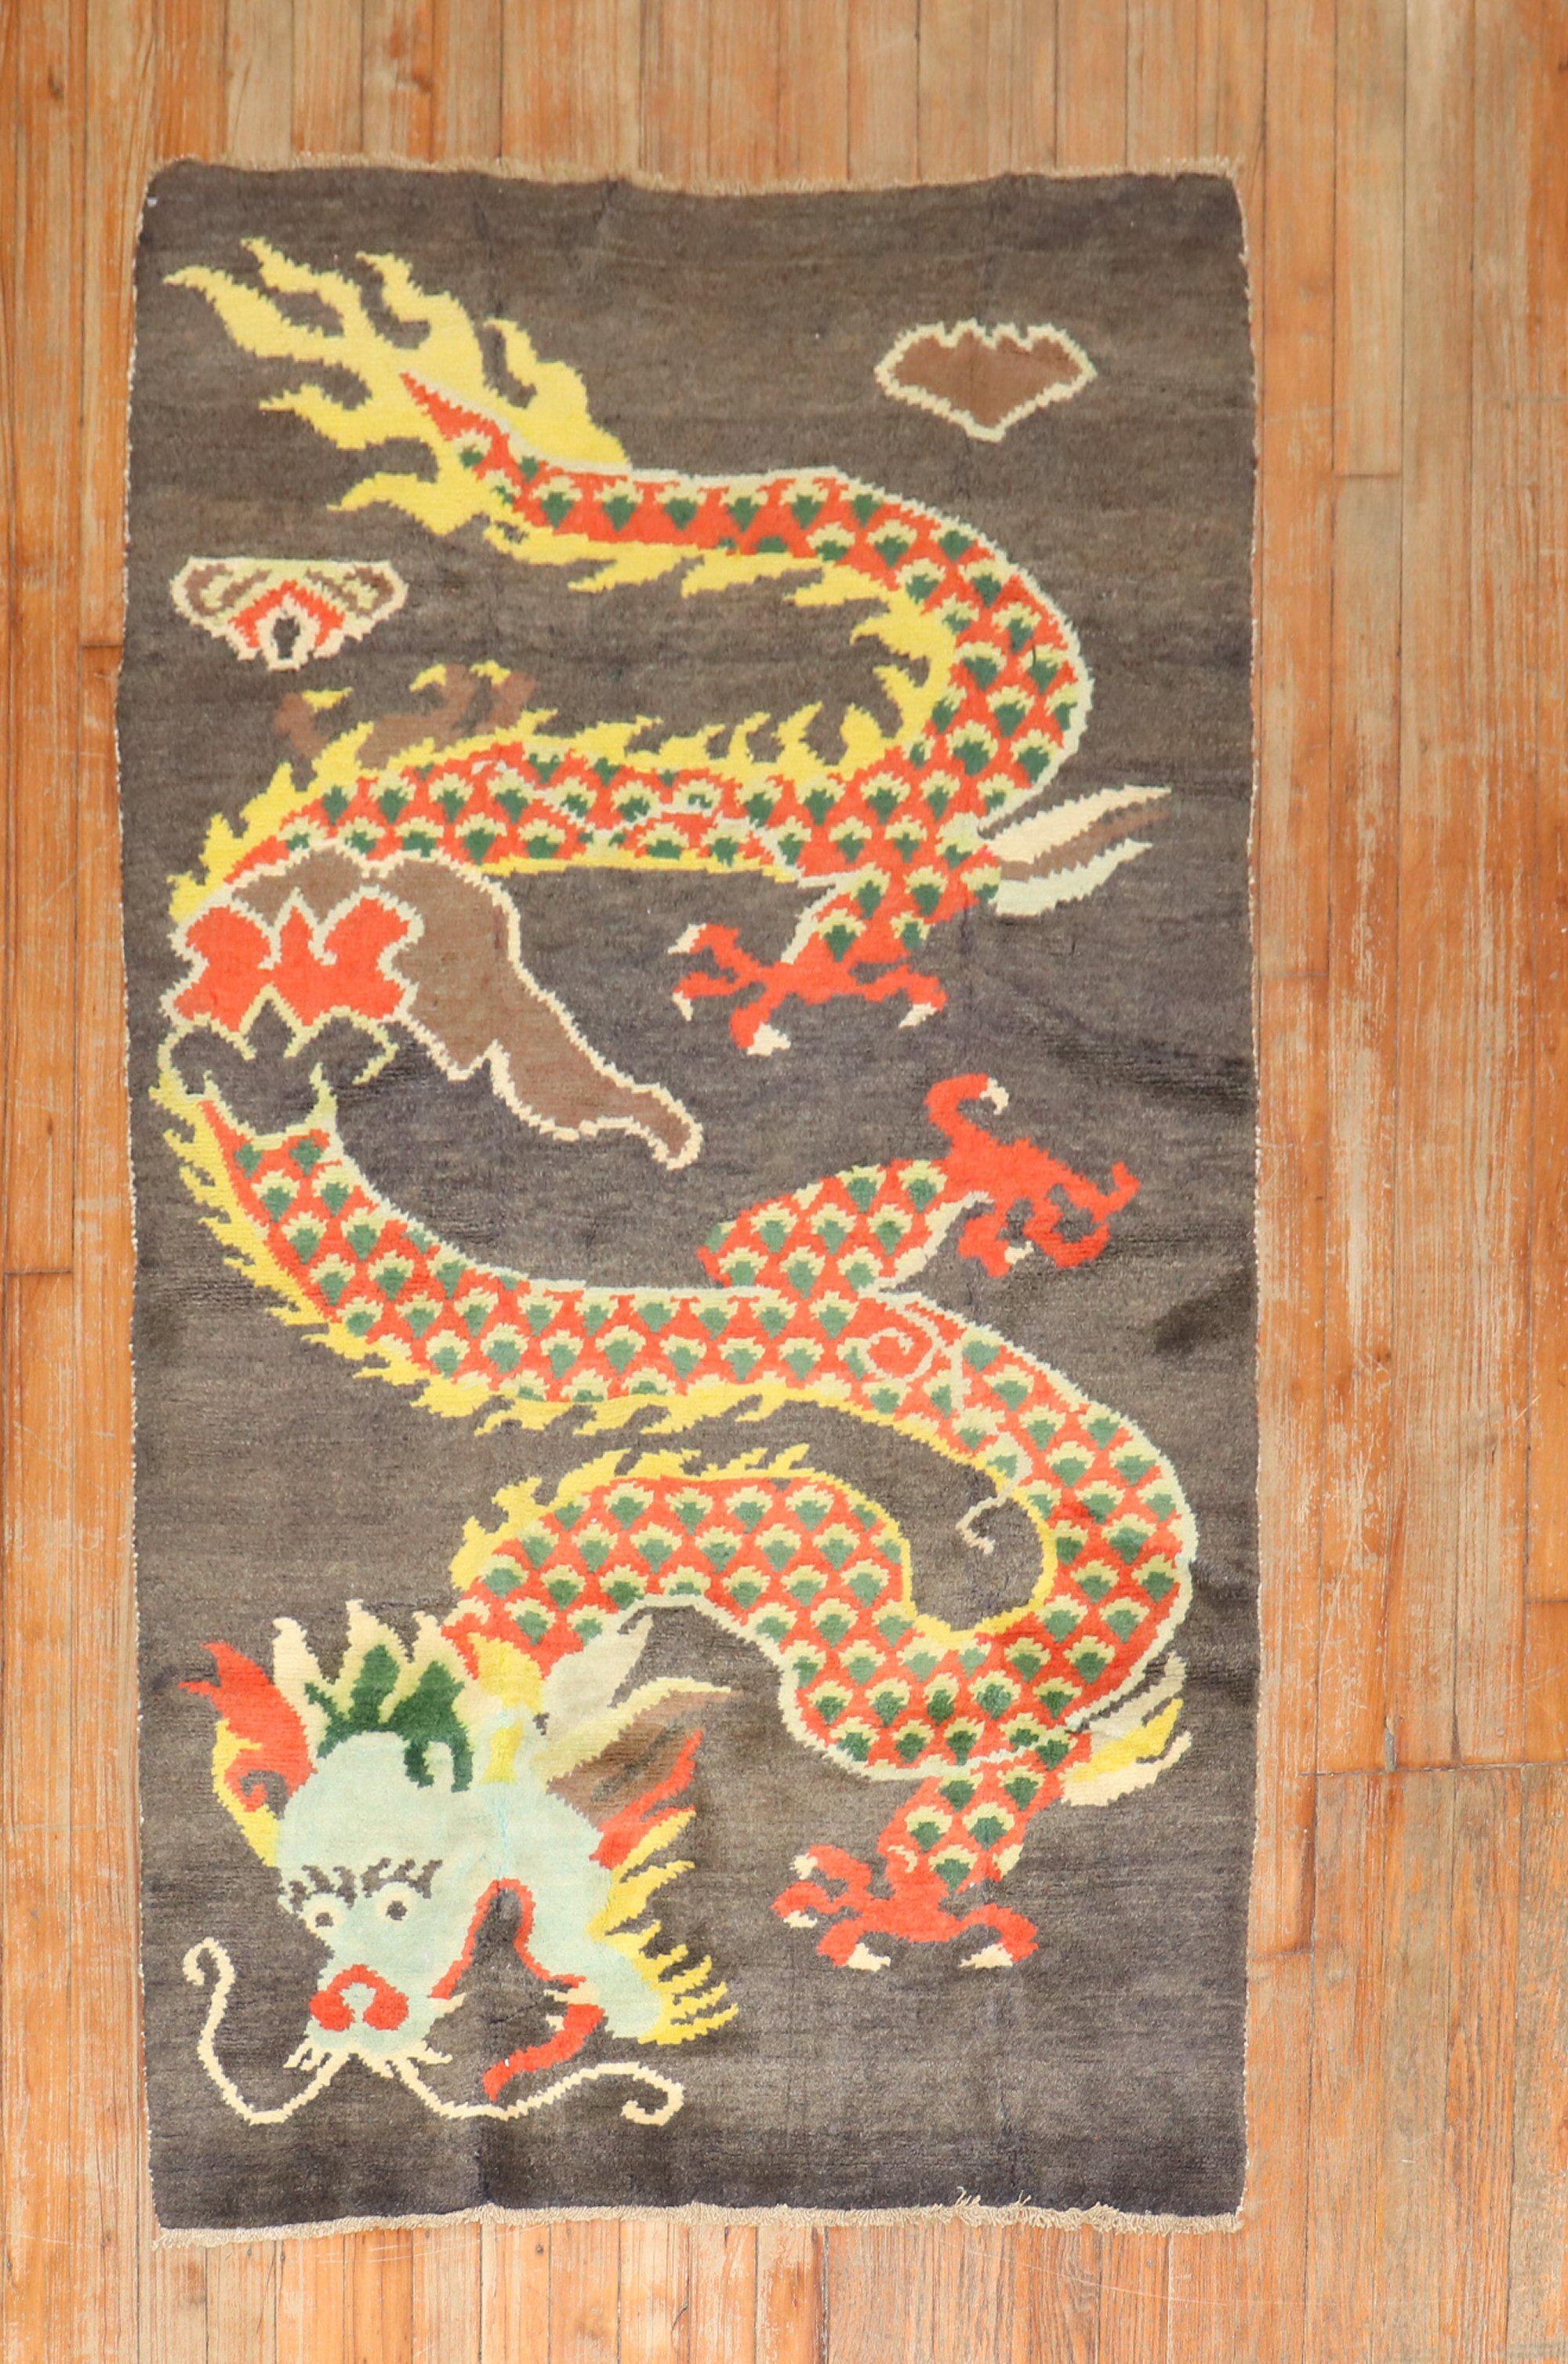 A 3rd quarter of the 20th-century Tibetan rug with a dragon motif on a brown field

Size: 3'1'' x 58''.

